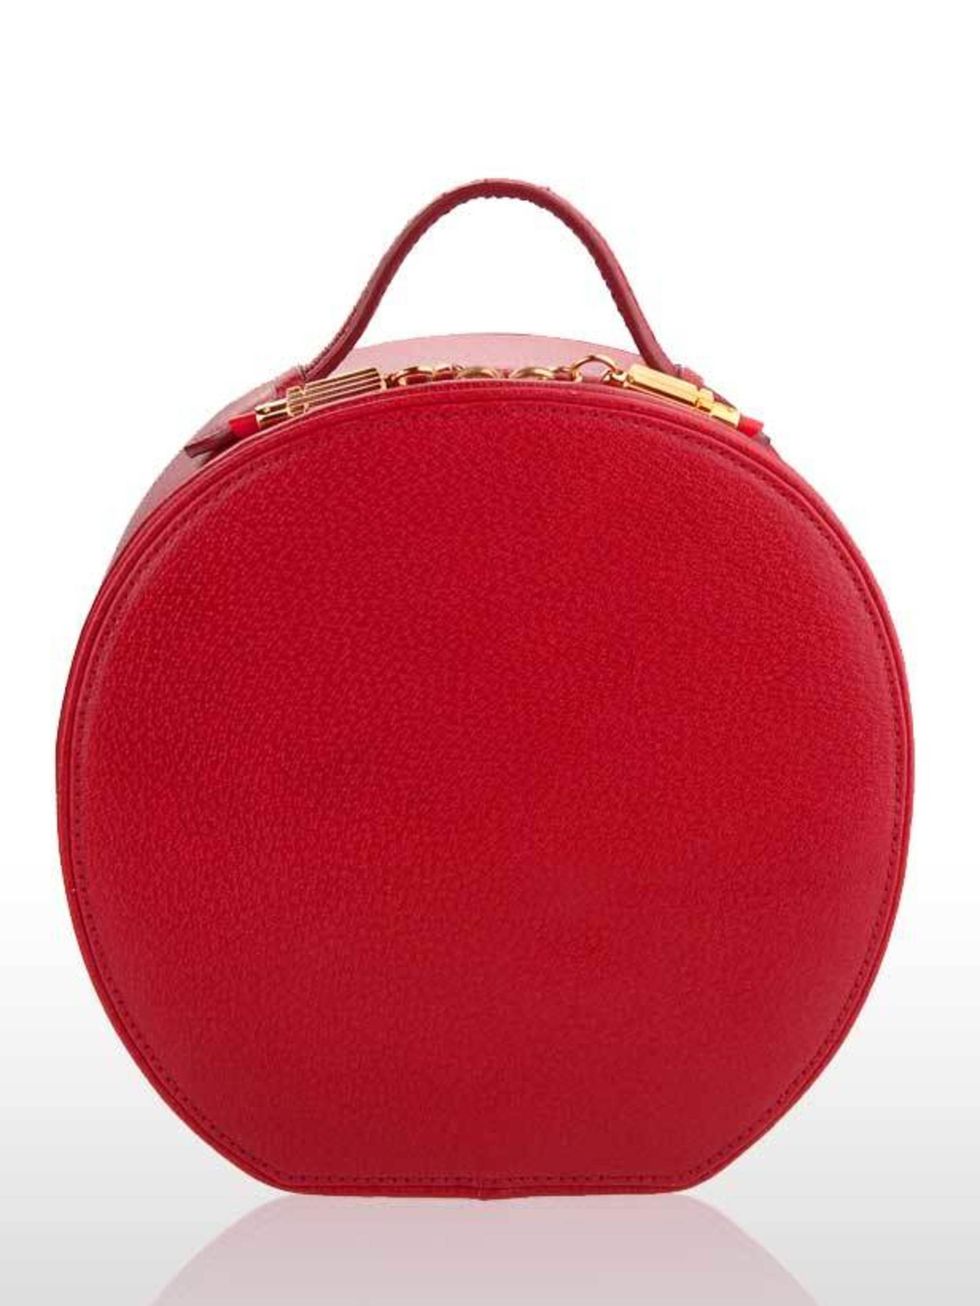 <p>Leather Vanity Case, Price on Request by <a href="http://www.luluguinness.com/">Lulu Guinness</a>. For stockists call 020 7823 4828.</p><p>This leather vanity case will house all your cosmetics or for the truly eccentric, use it as an evening bag. We h